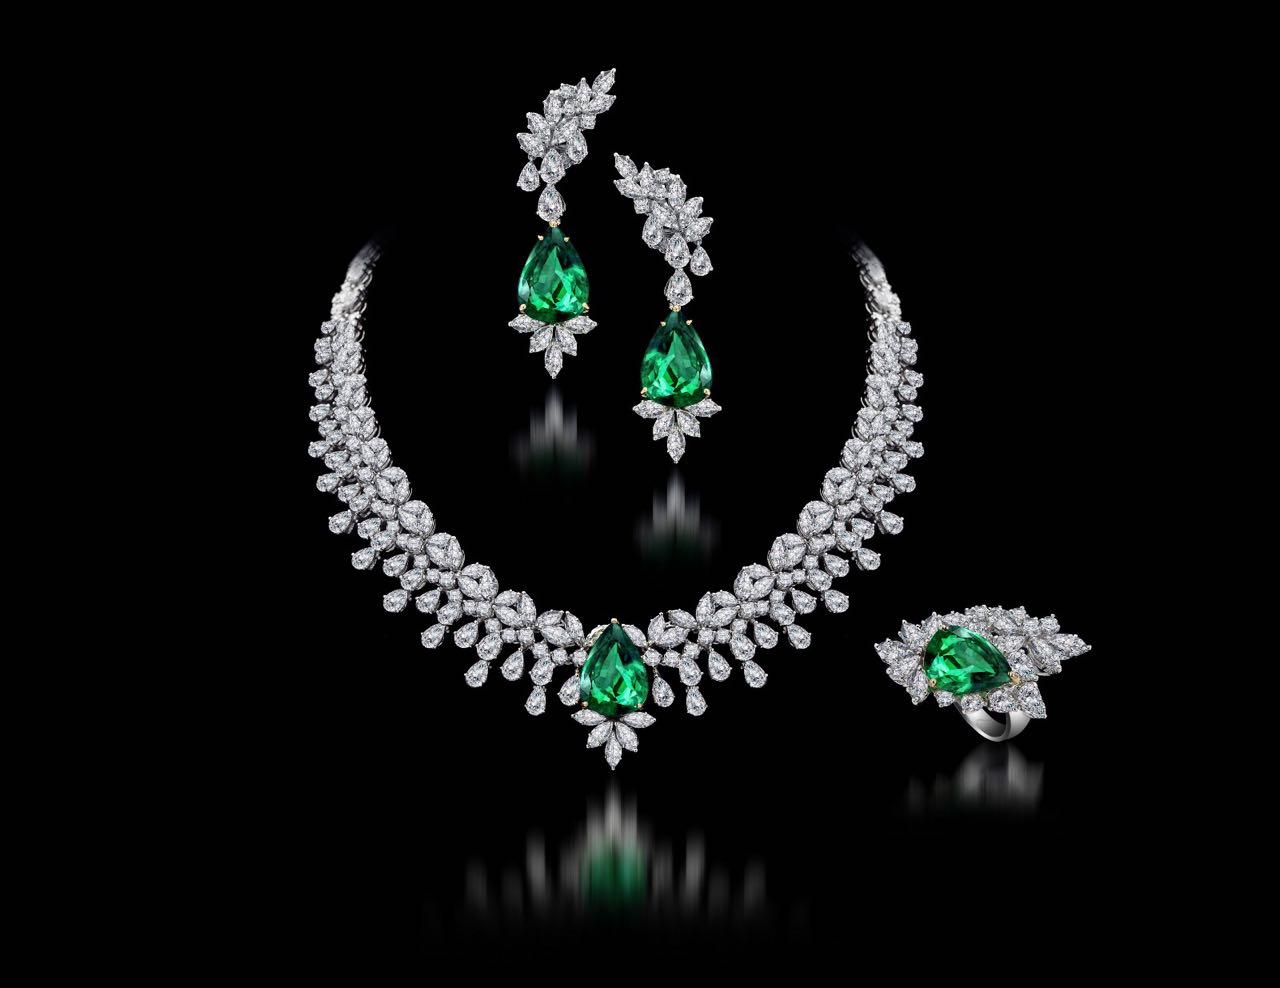 Diamond and emerald necklace, earrings and ring set